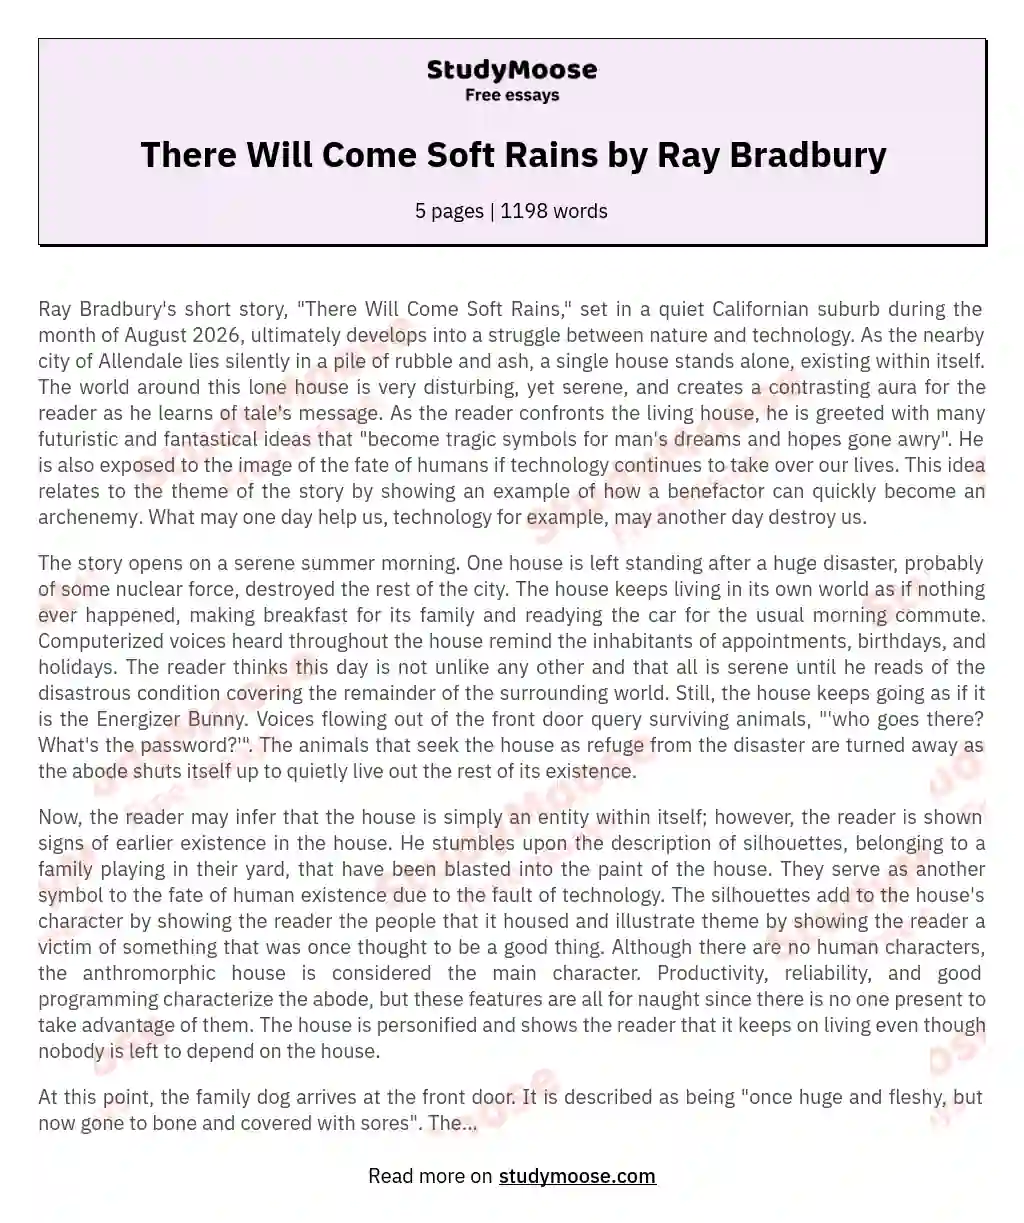 There Will Come Soft Rains by Ray Bradbury essay